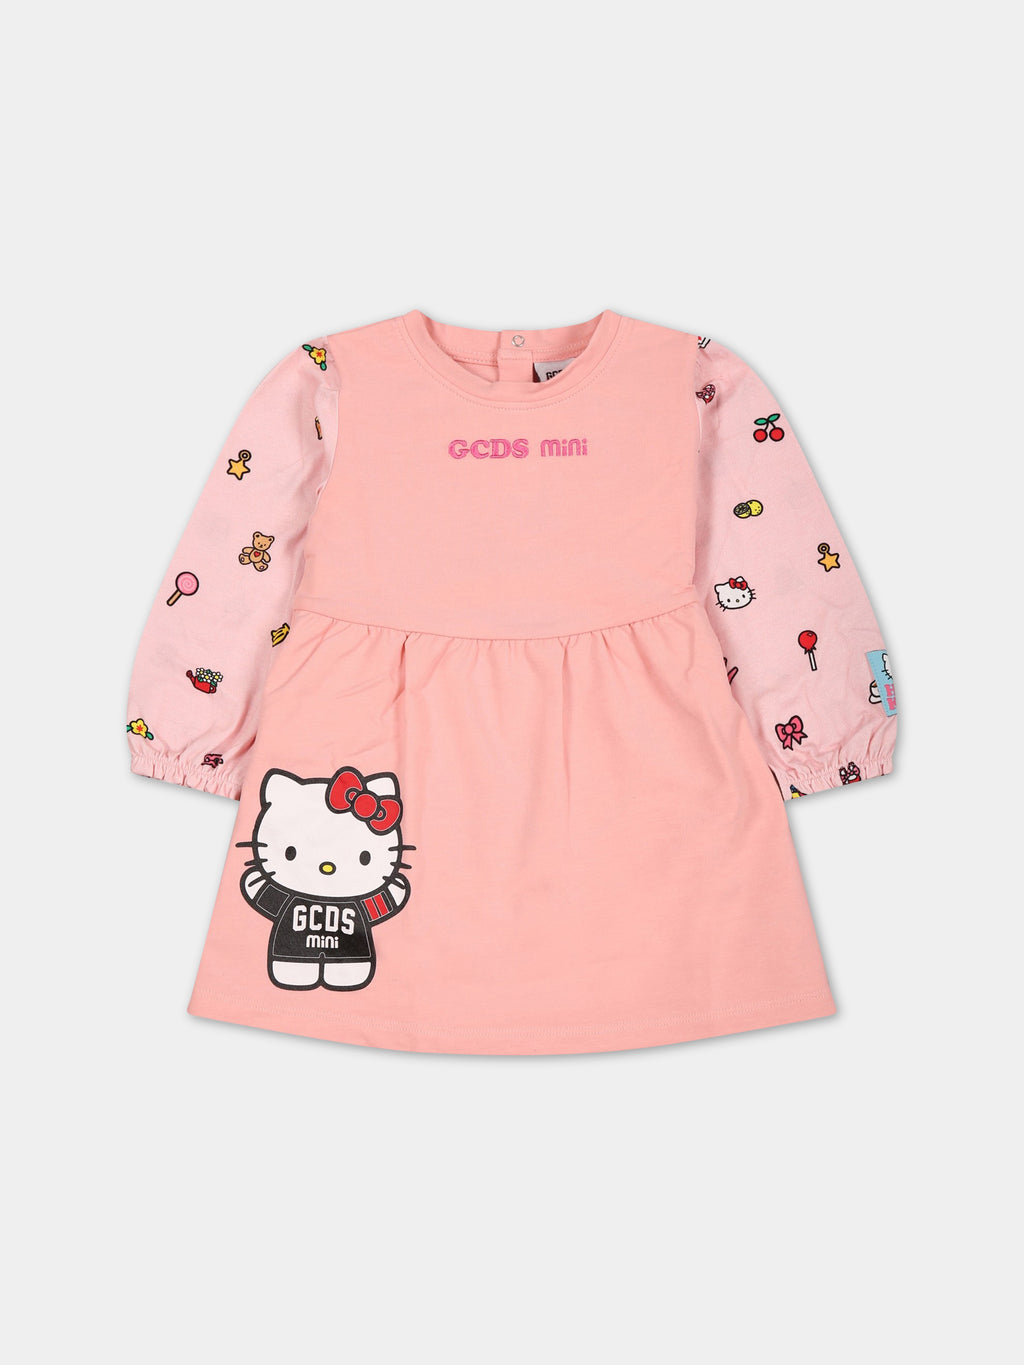 Pink dress for baby girl with print and logo